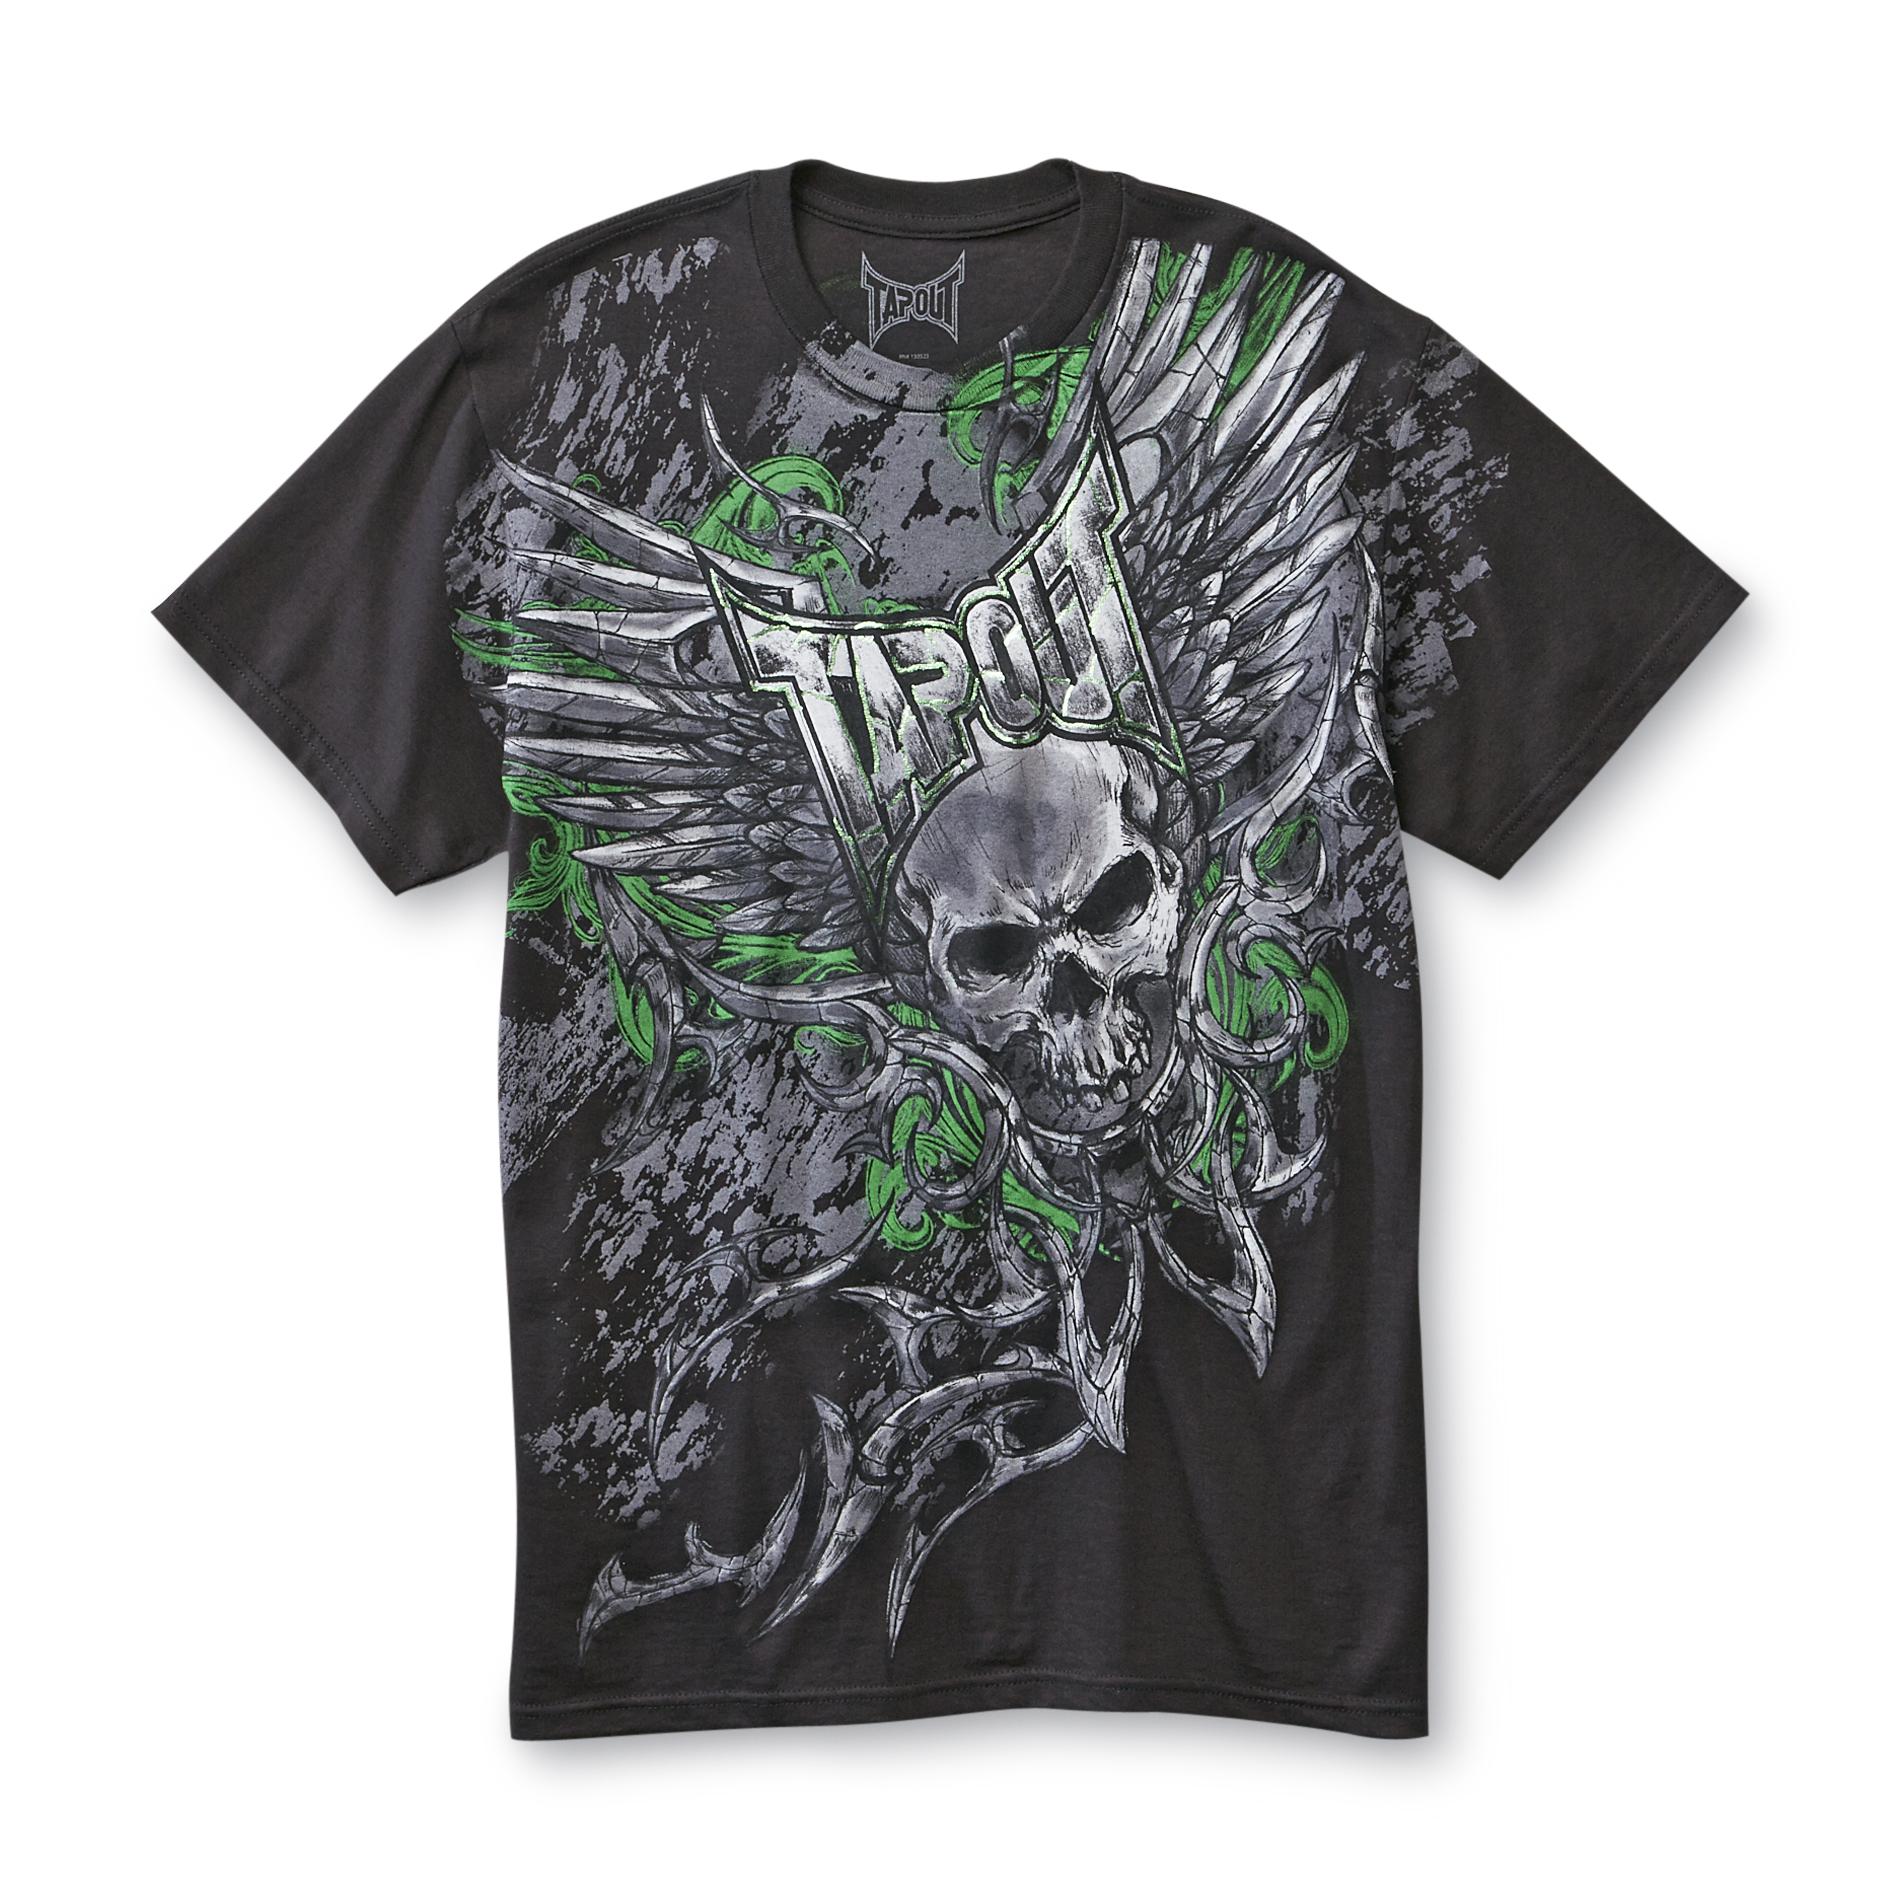 TapouT Young Men's Graphic T-Shirt - Skull